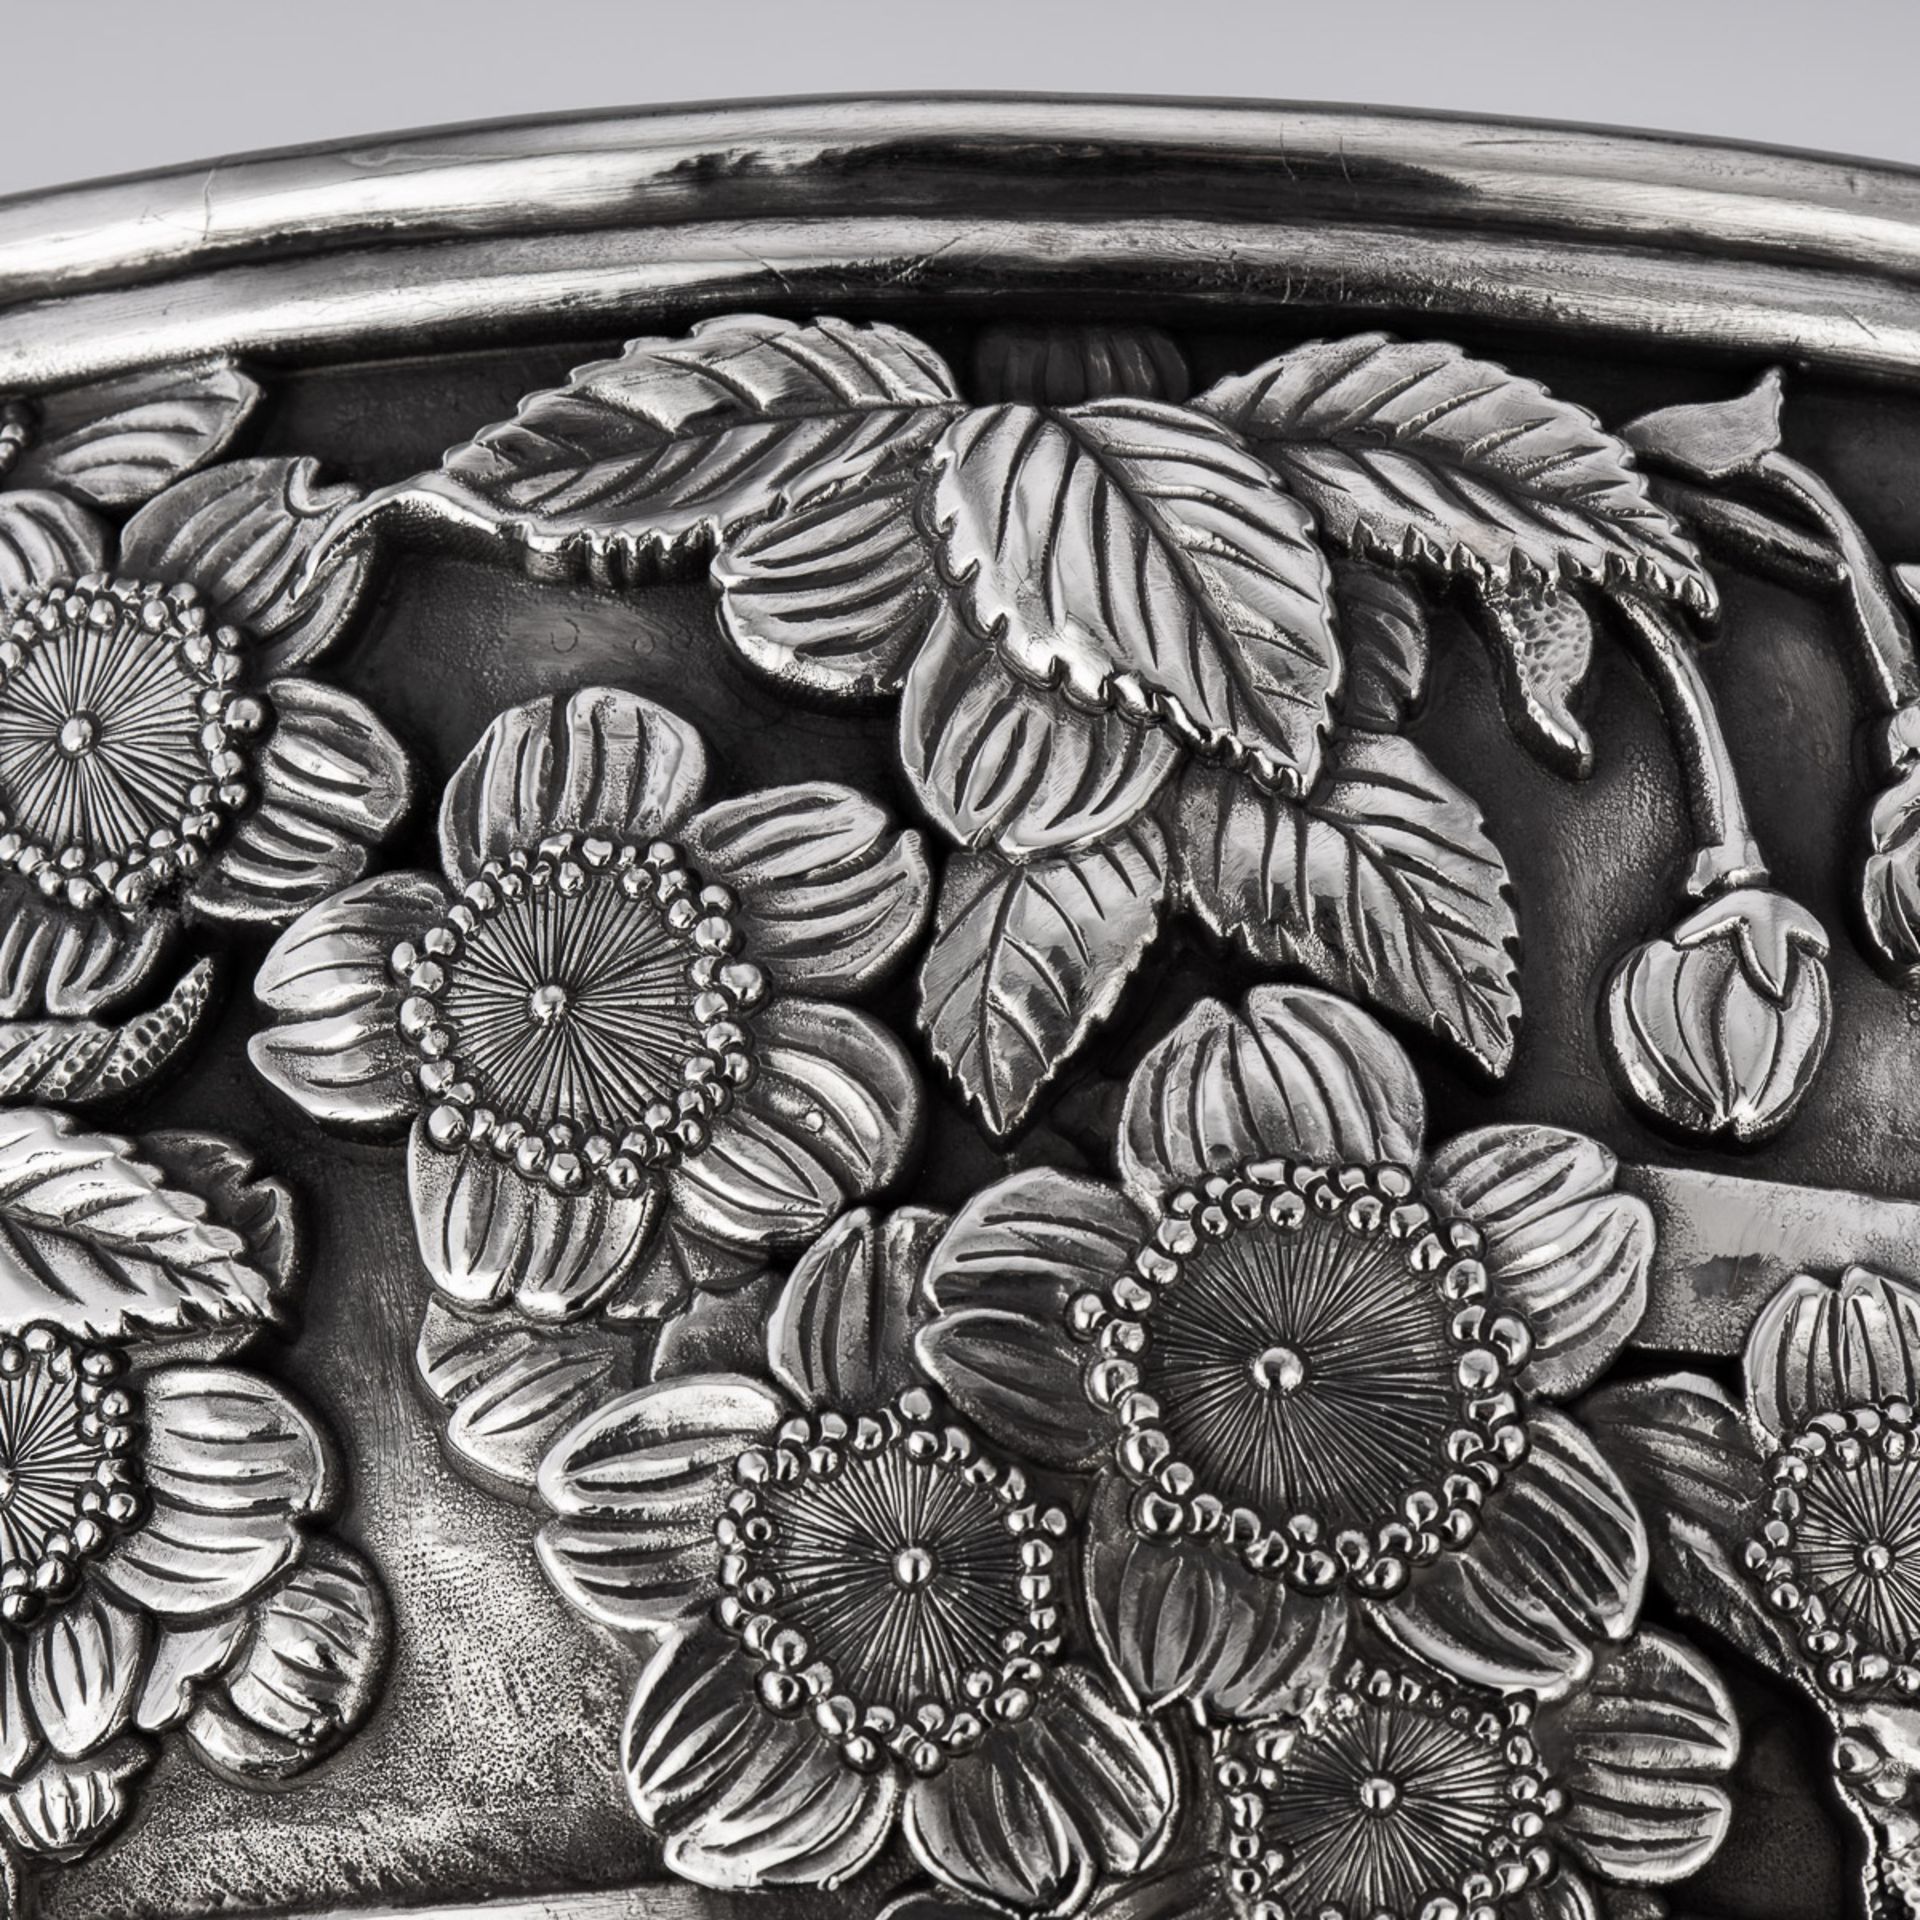 A MONUMENTAL LATE 19TH CENTURY JAPANESE SOLID SILVER BOWL C. 1900 - Image 9 of 17